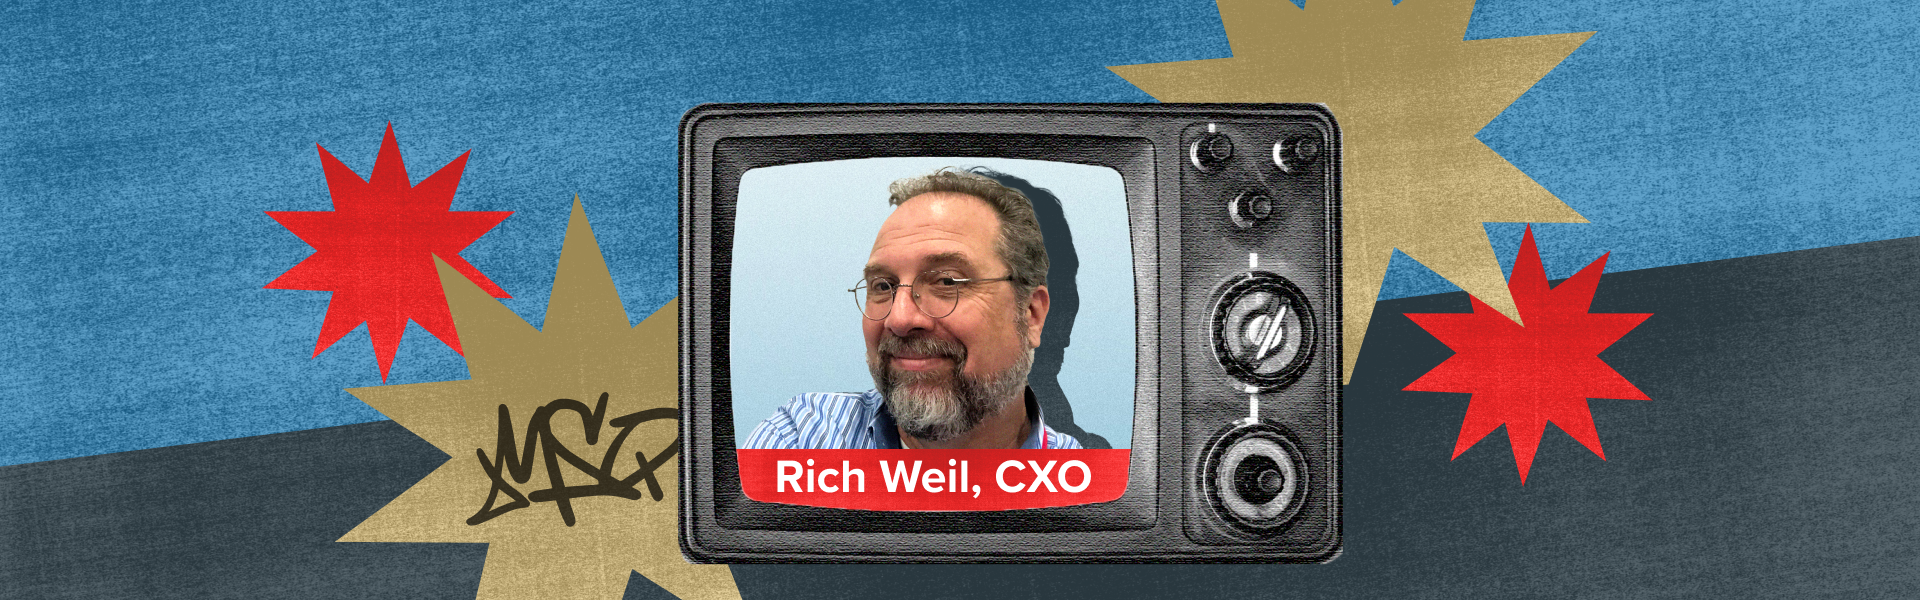 Introducing Department X and CXO Rich Weil